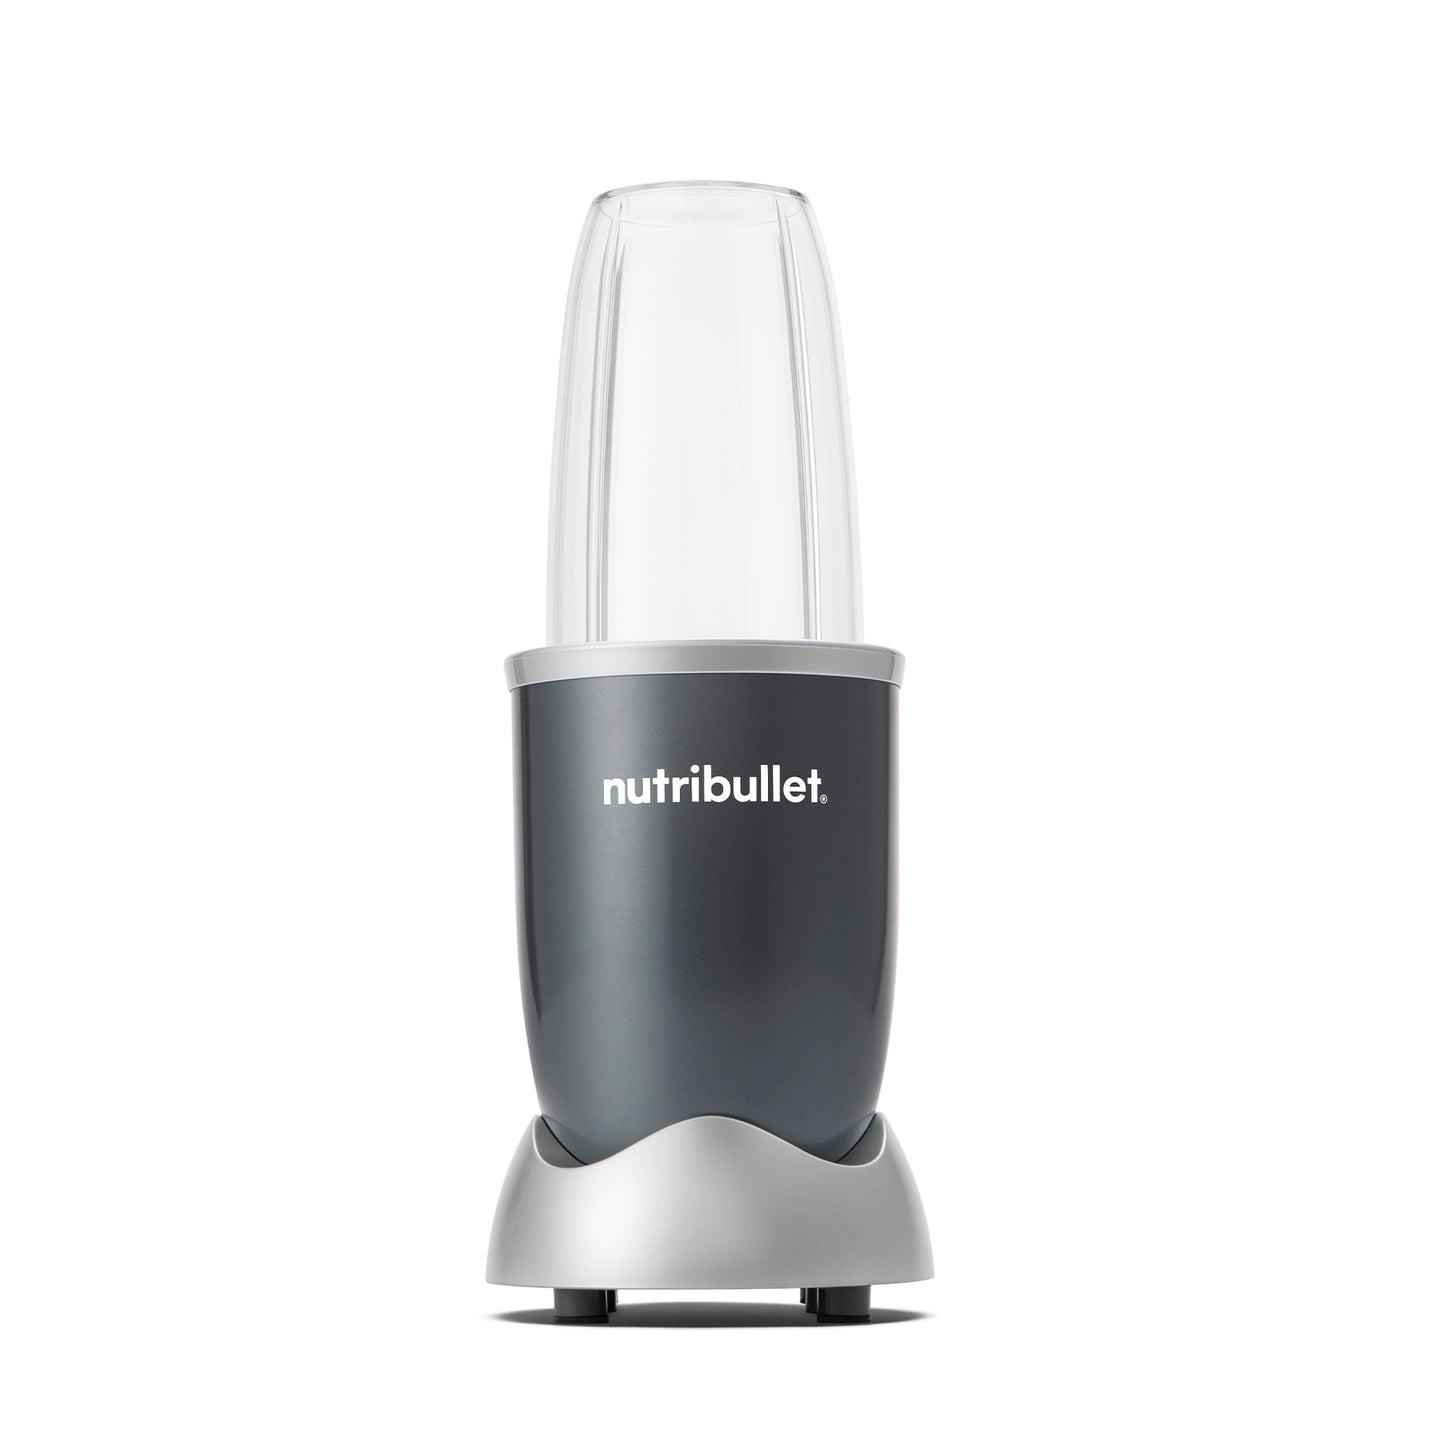 NutriBullet 600 Watt Personal Blender: A Powerful and Convenient Way to Blend Your Way to Health